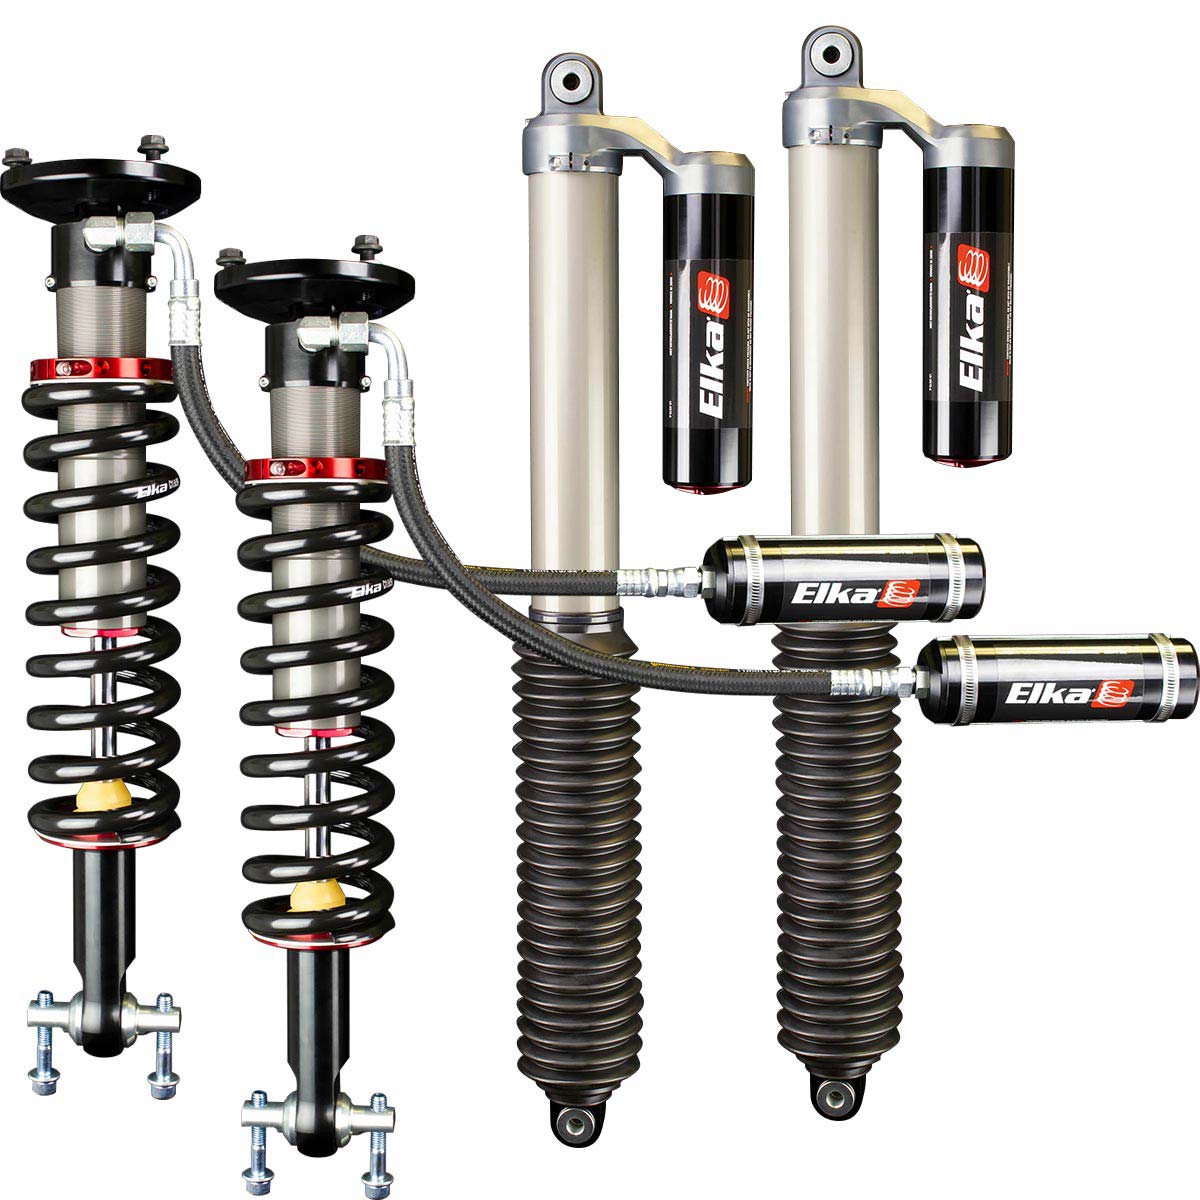 2.5 RESERVOIR FRONT & REAR SHOCKS KIT for FORD F-150 4x4, 2014 to 